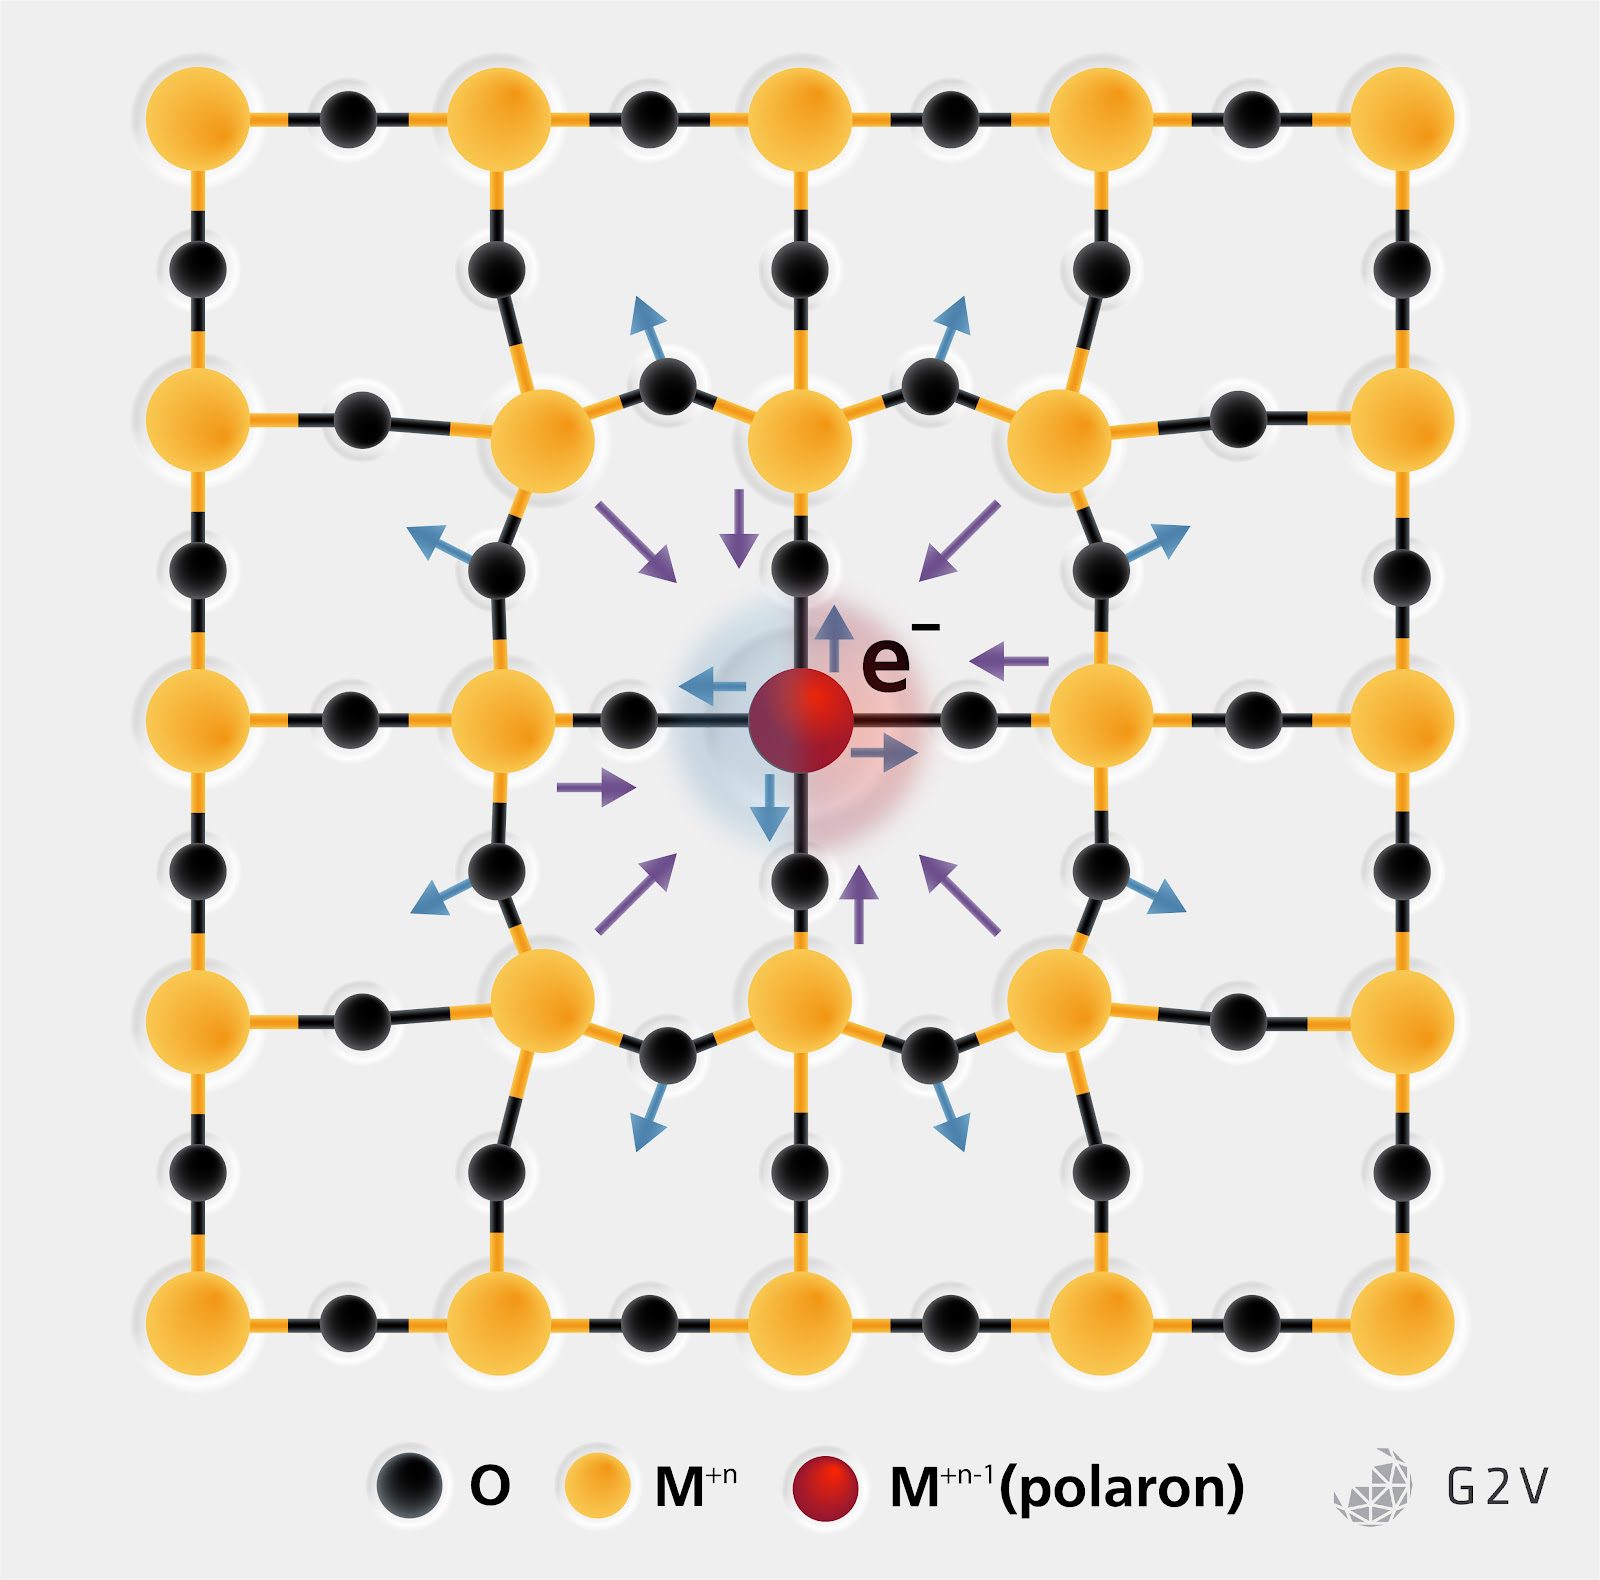 Lattice deformation of a polaron in an ionic solid.